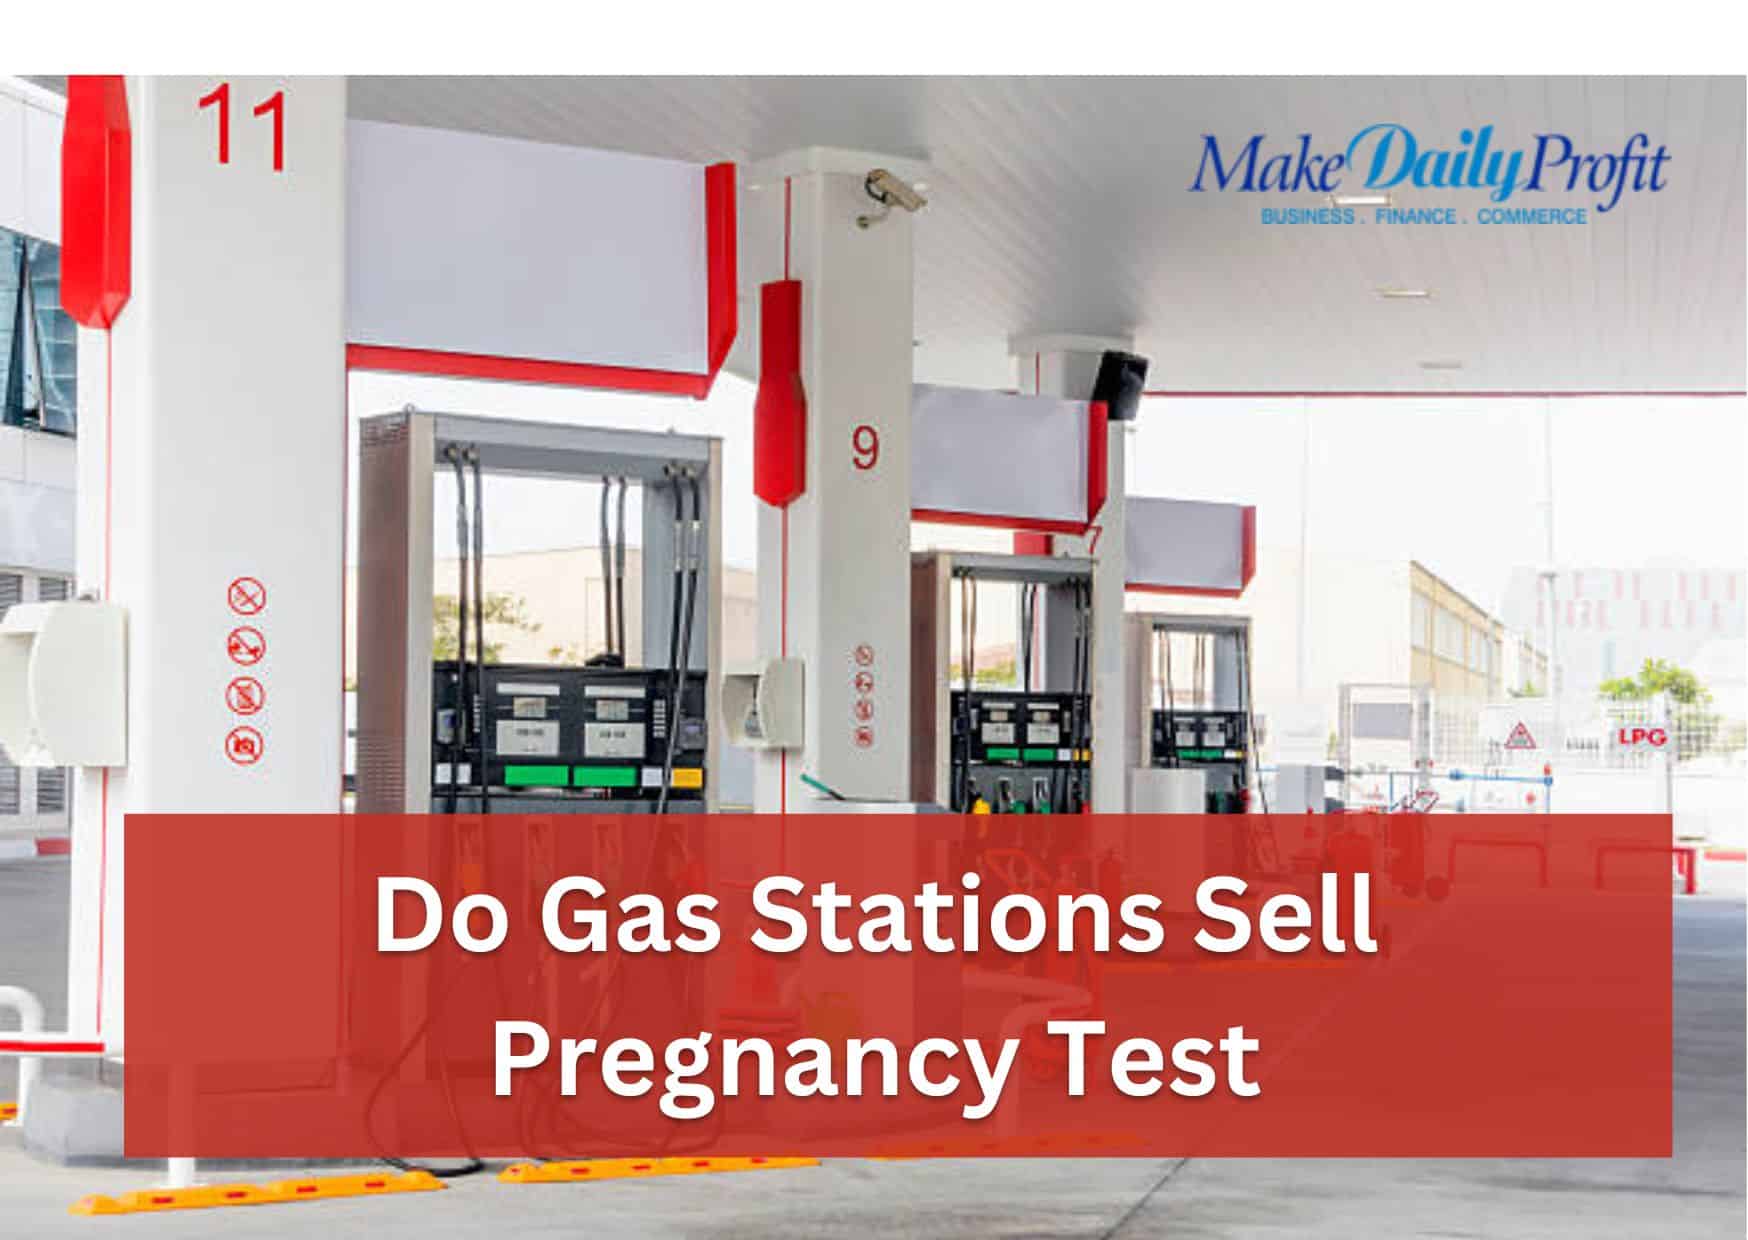 Do Gas Stations Sell Pregnancy Tests? Best Place to Buy Pregnancy